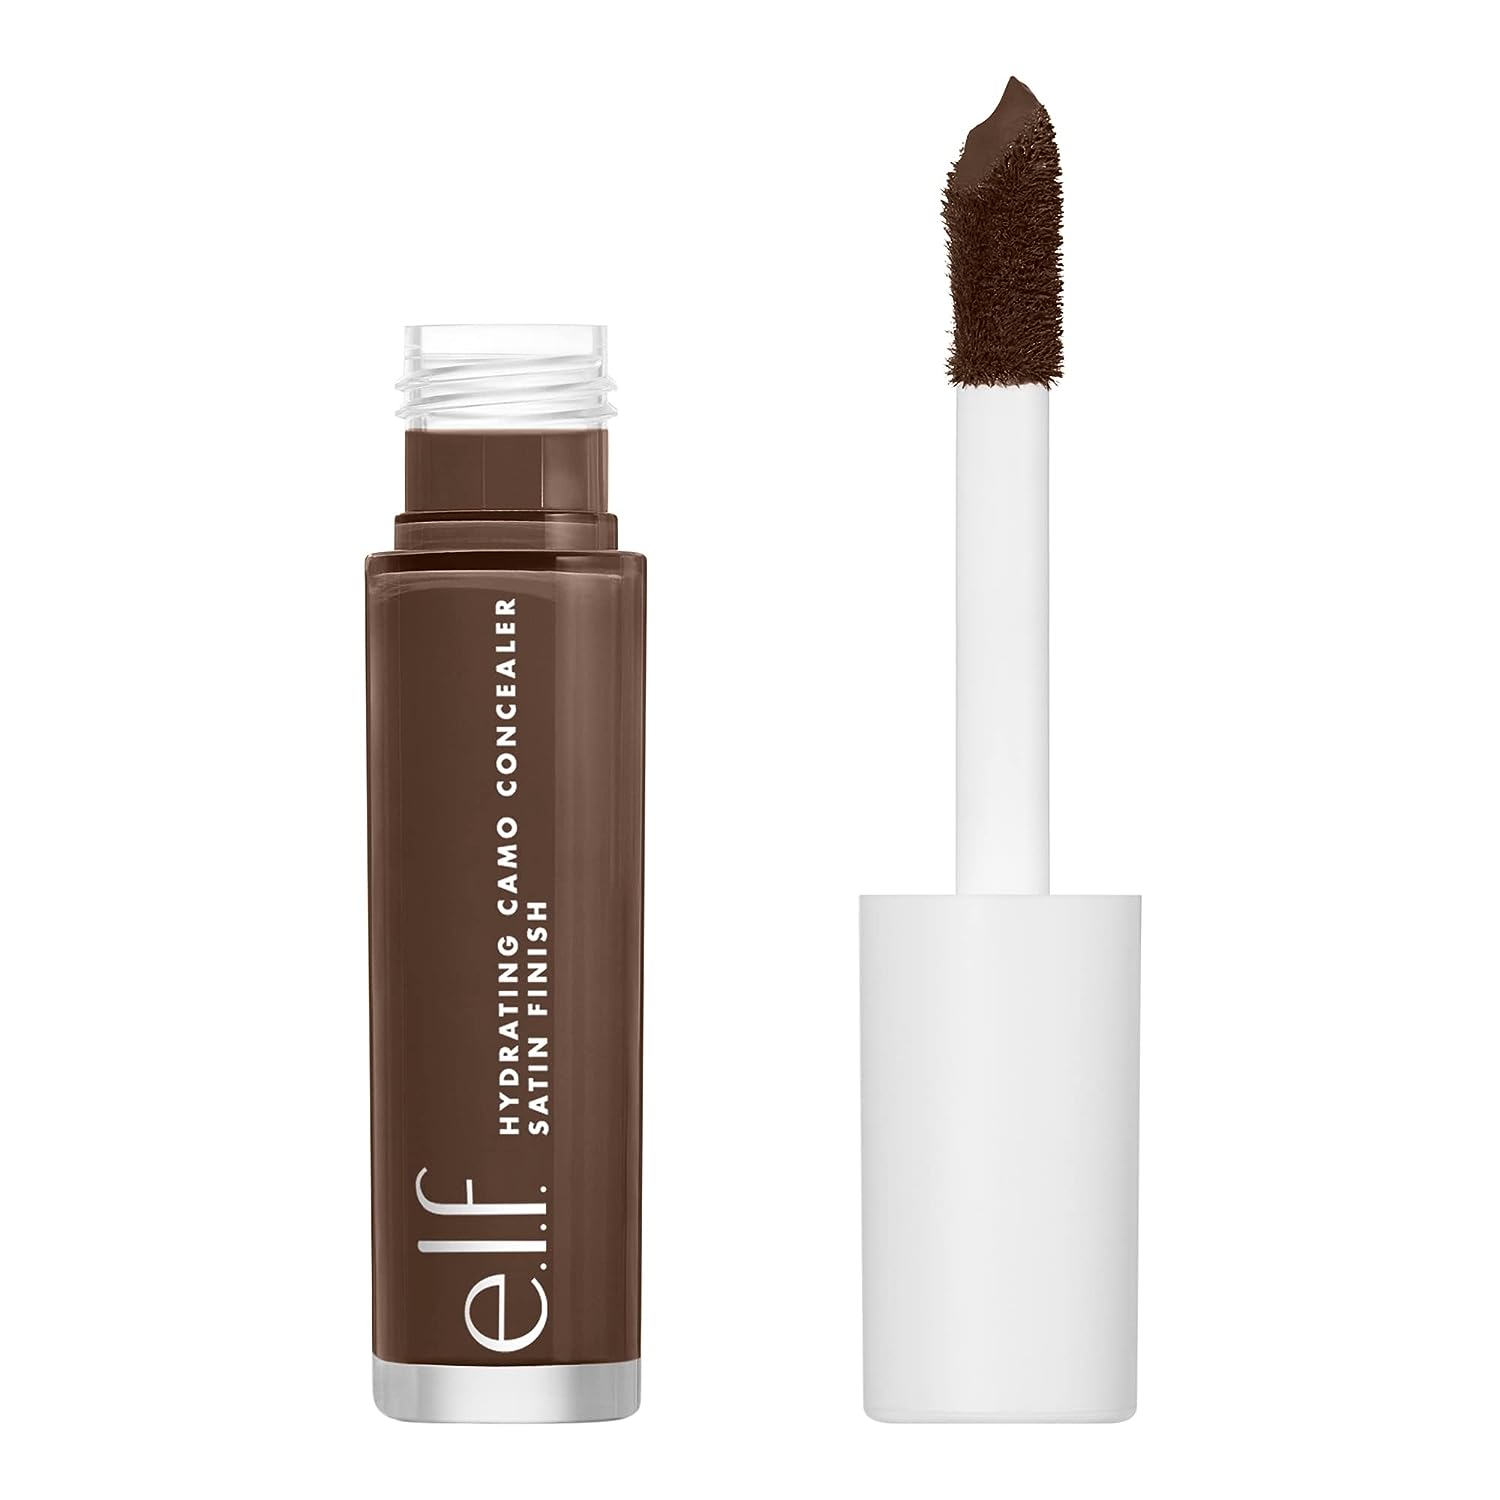 e.l.f. Hydrating Camo Concealer, Crease-Proof Full Coverage, Satin Finish, Conceals, Corrects & Highlights, Vegan & Cruelty-Free, Rich Walnut, 0.203